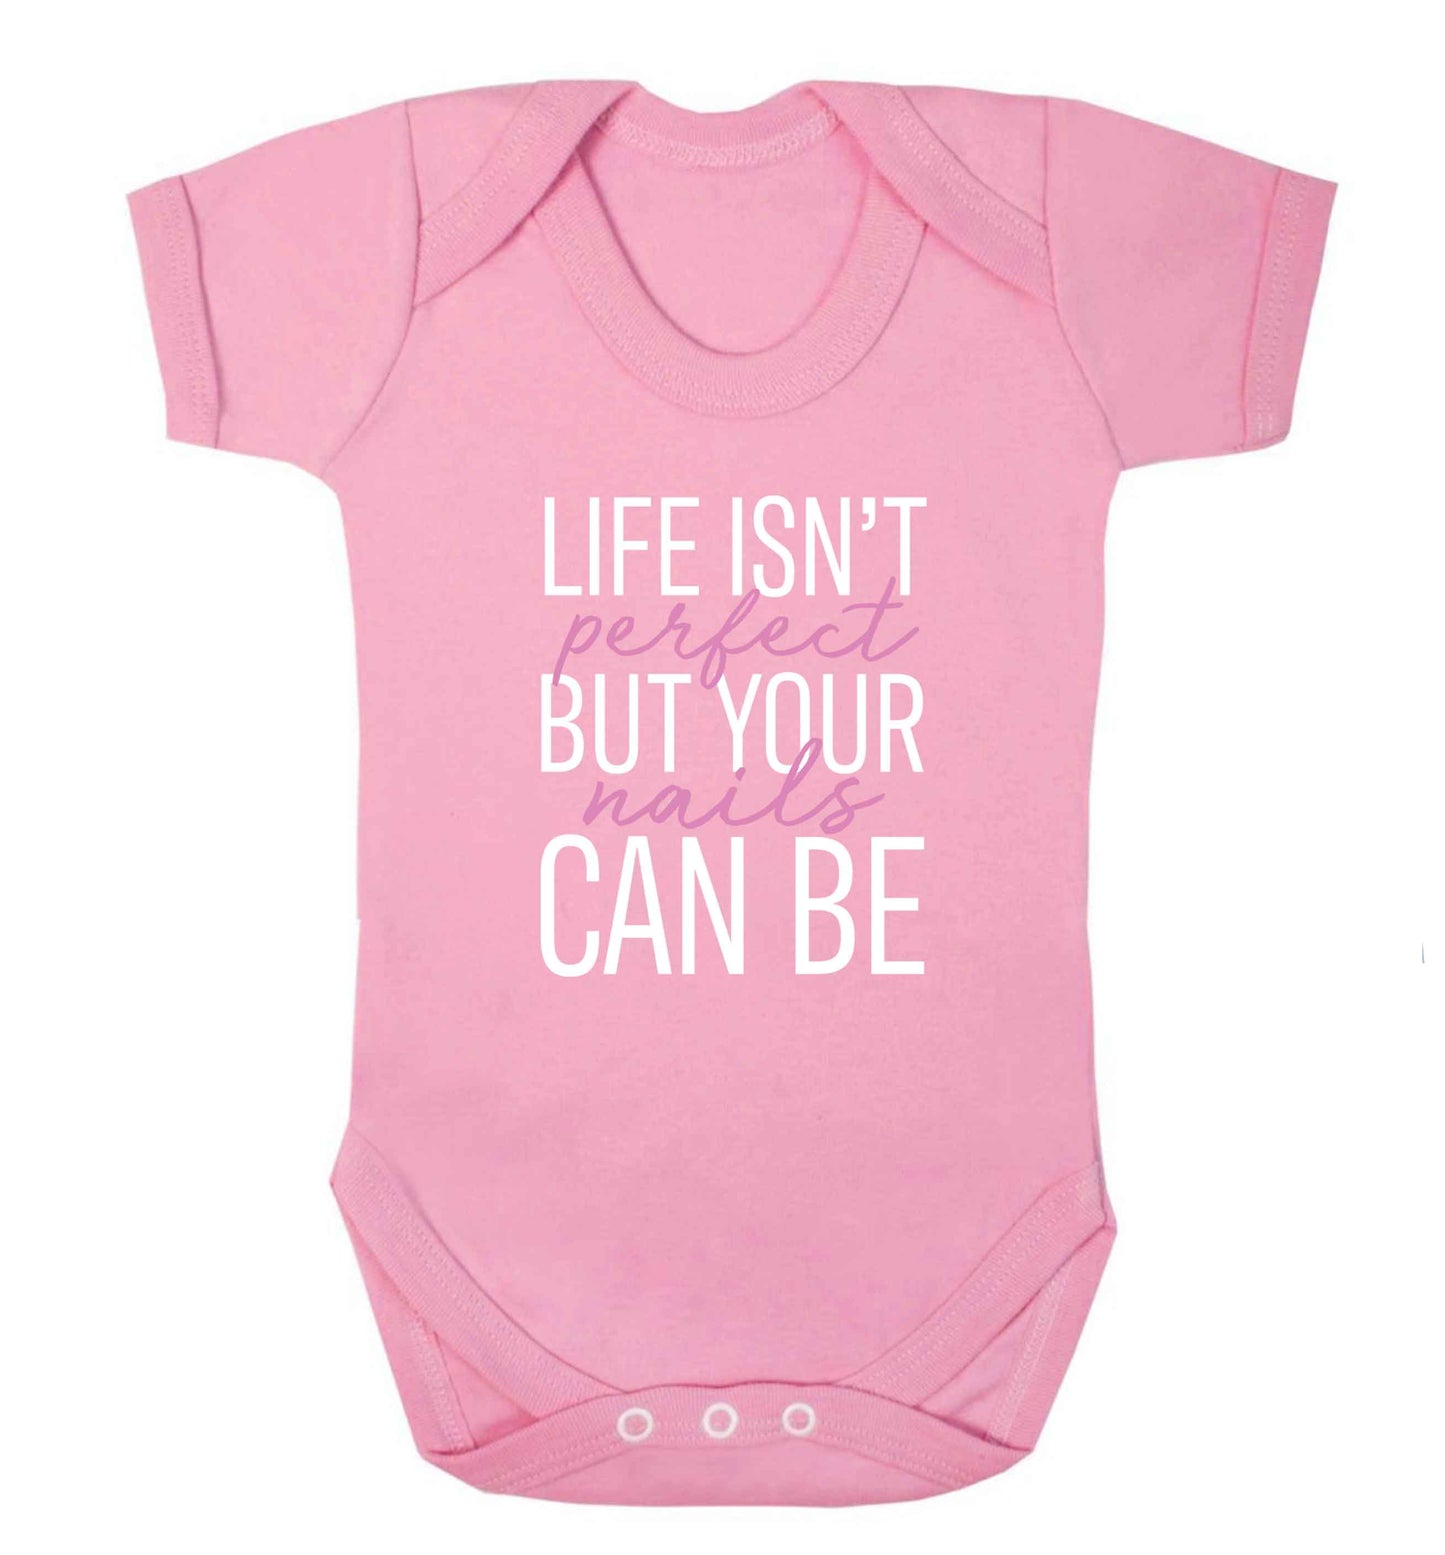 Life isn't perfect but your nails can be baby vest pale pink 18-24 months